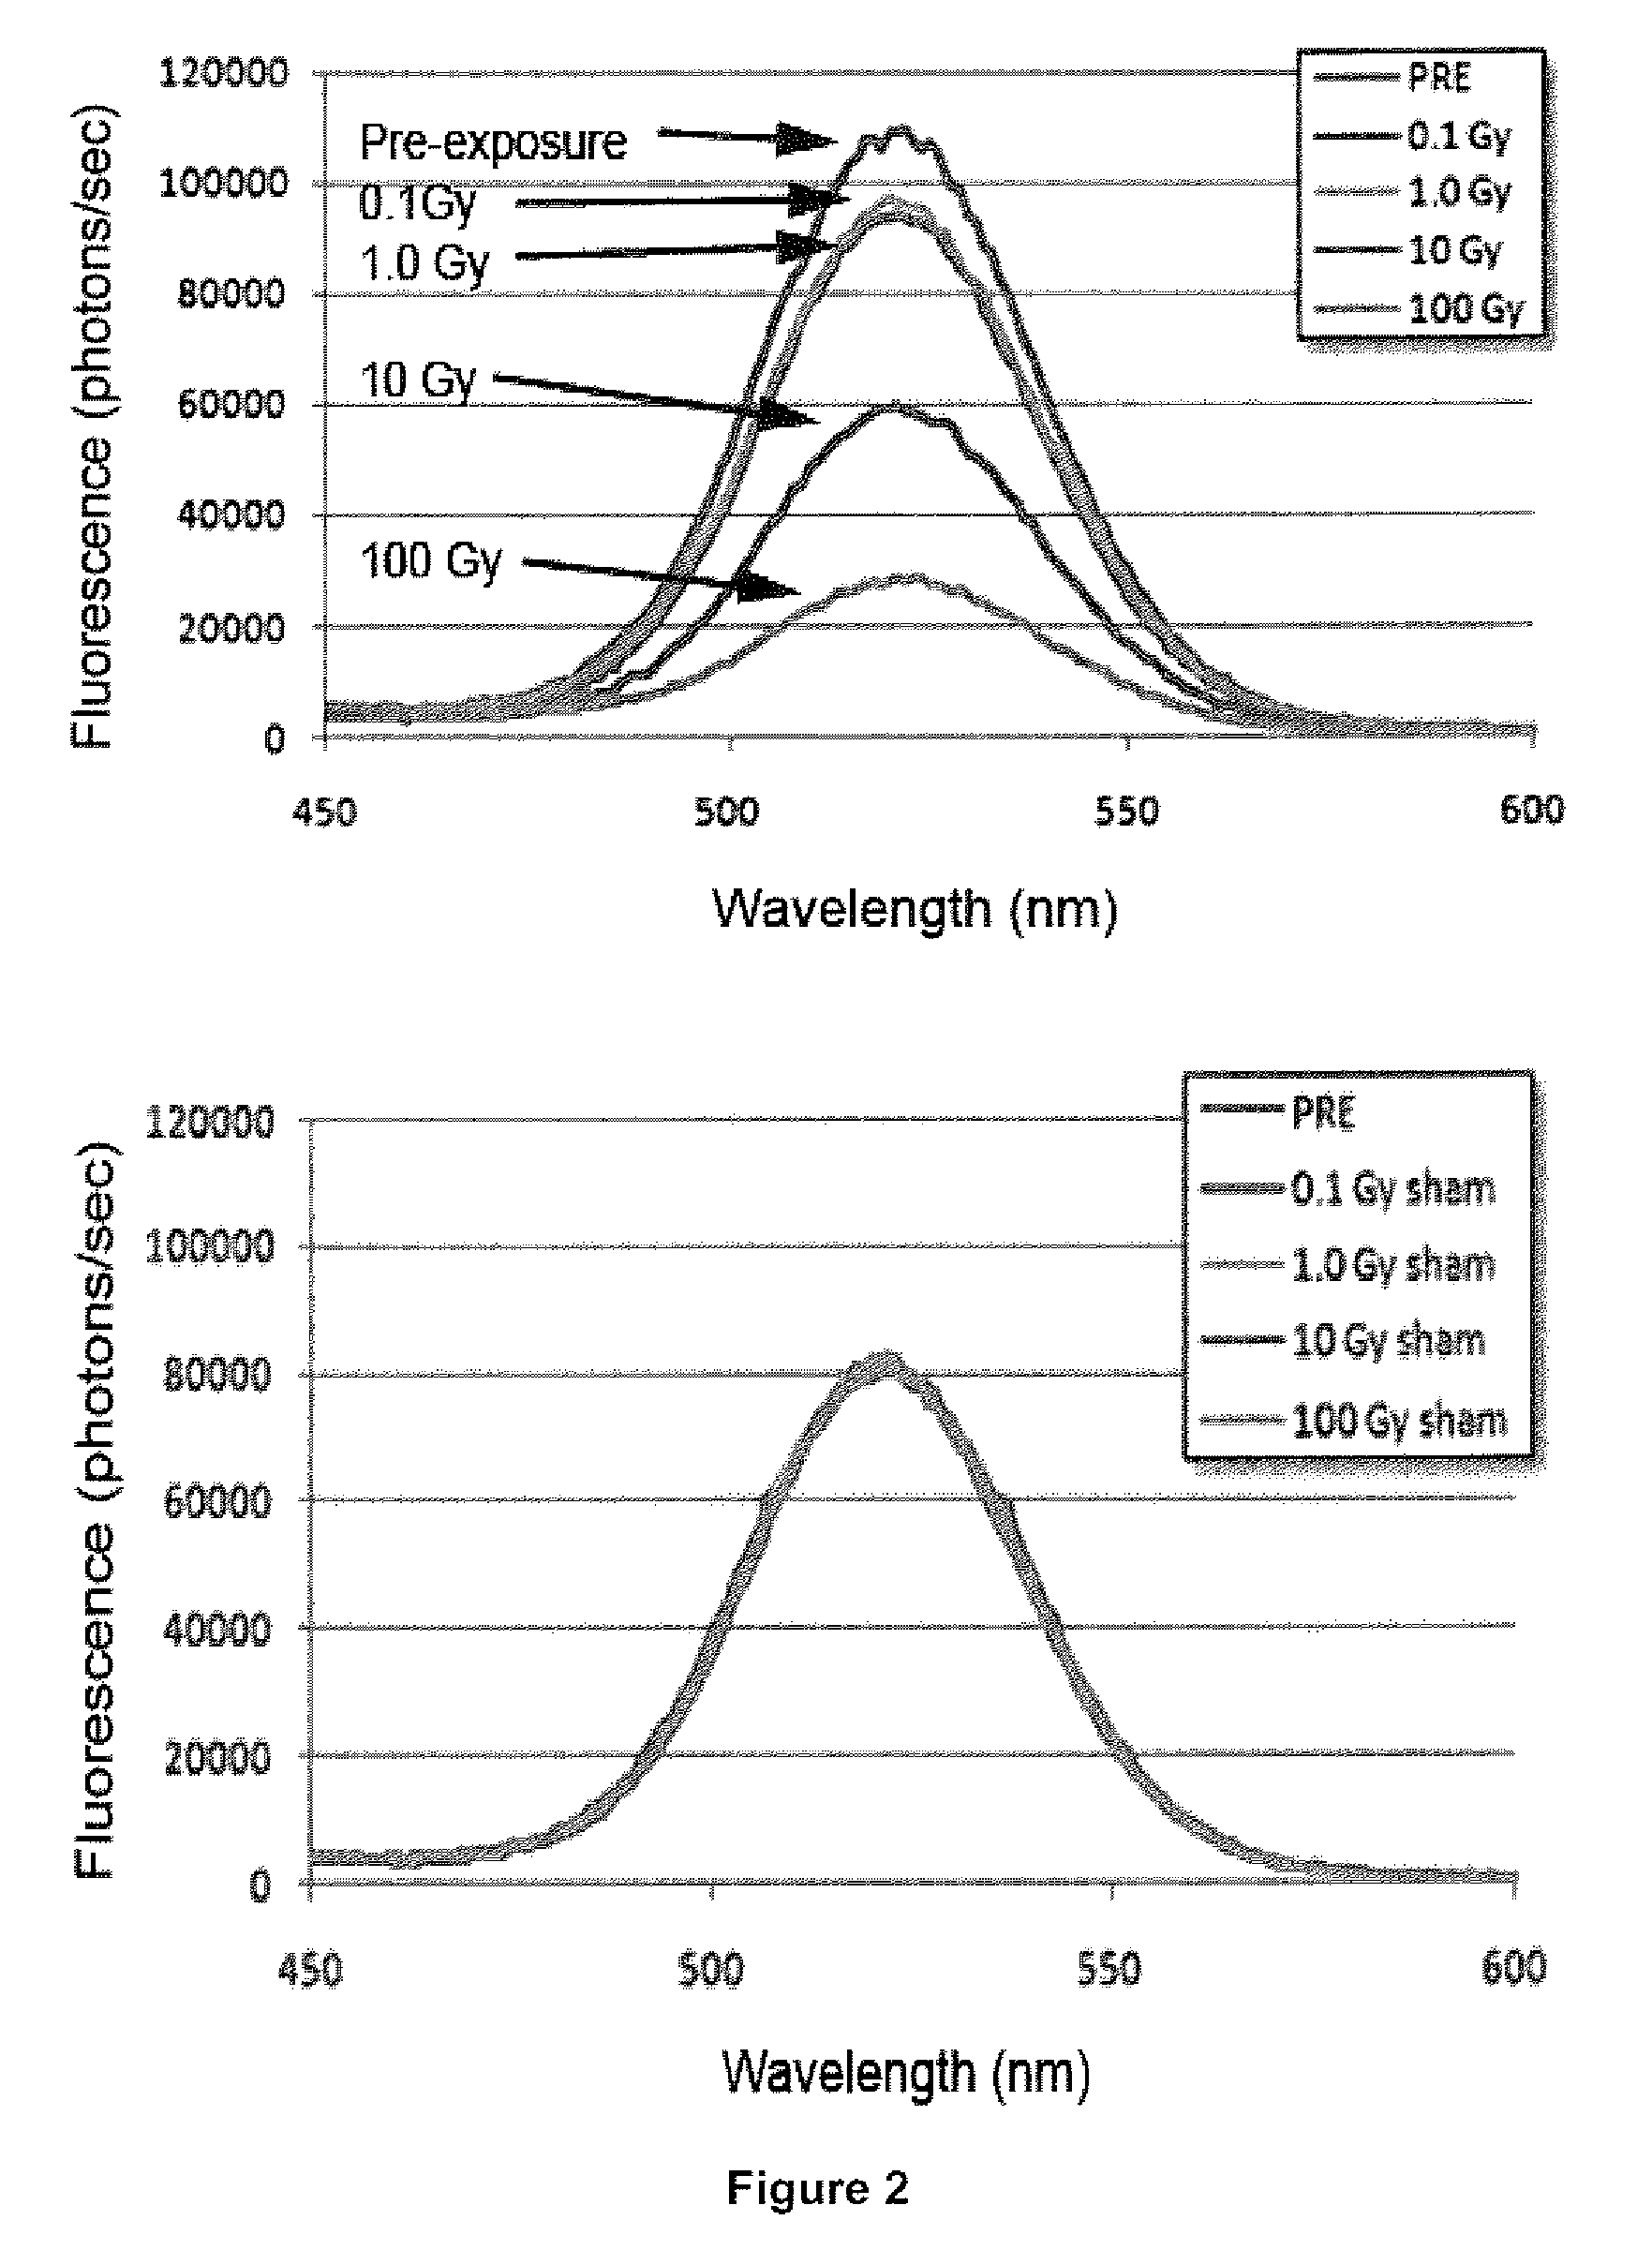 System and Methods Using Quantum Dots as General Dosimeters